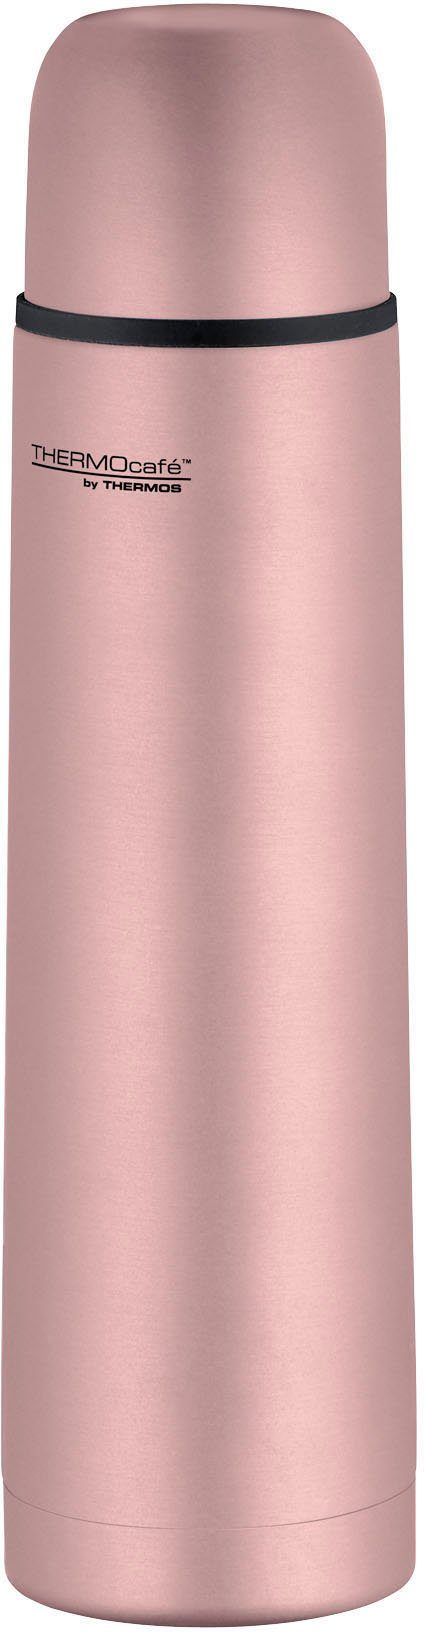 THERMOS Isolierflasche Everyday rosa